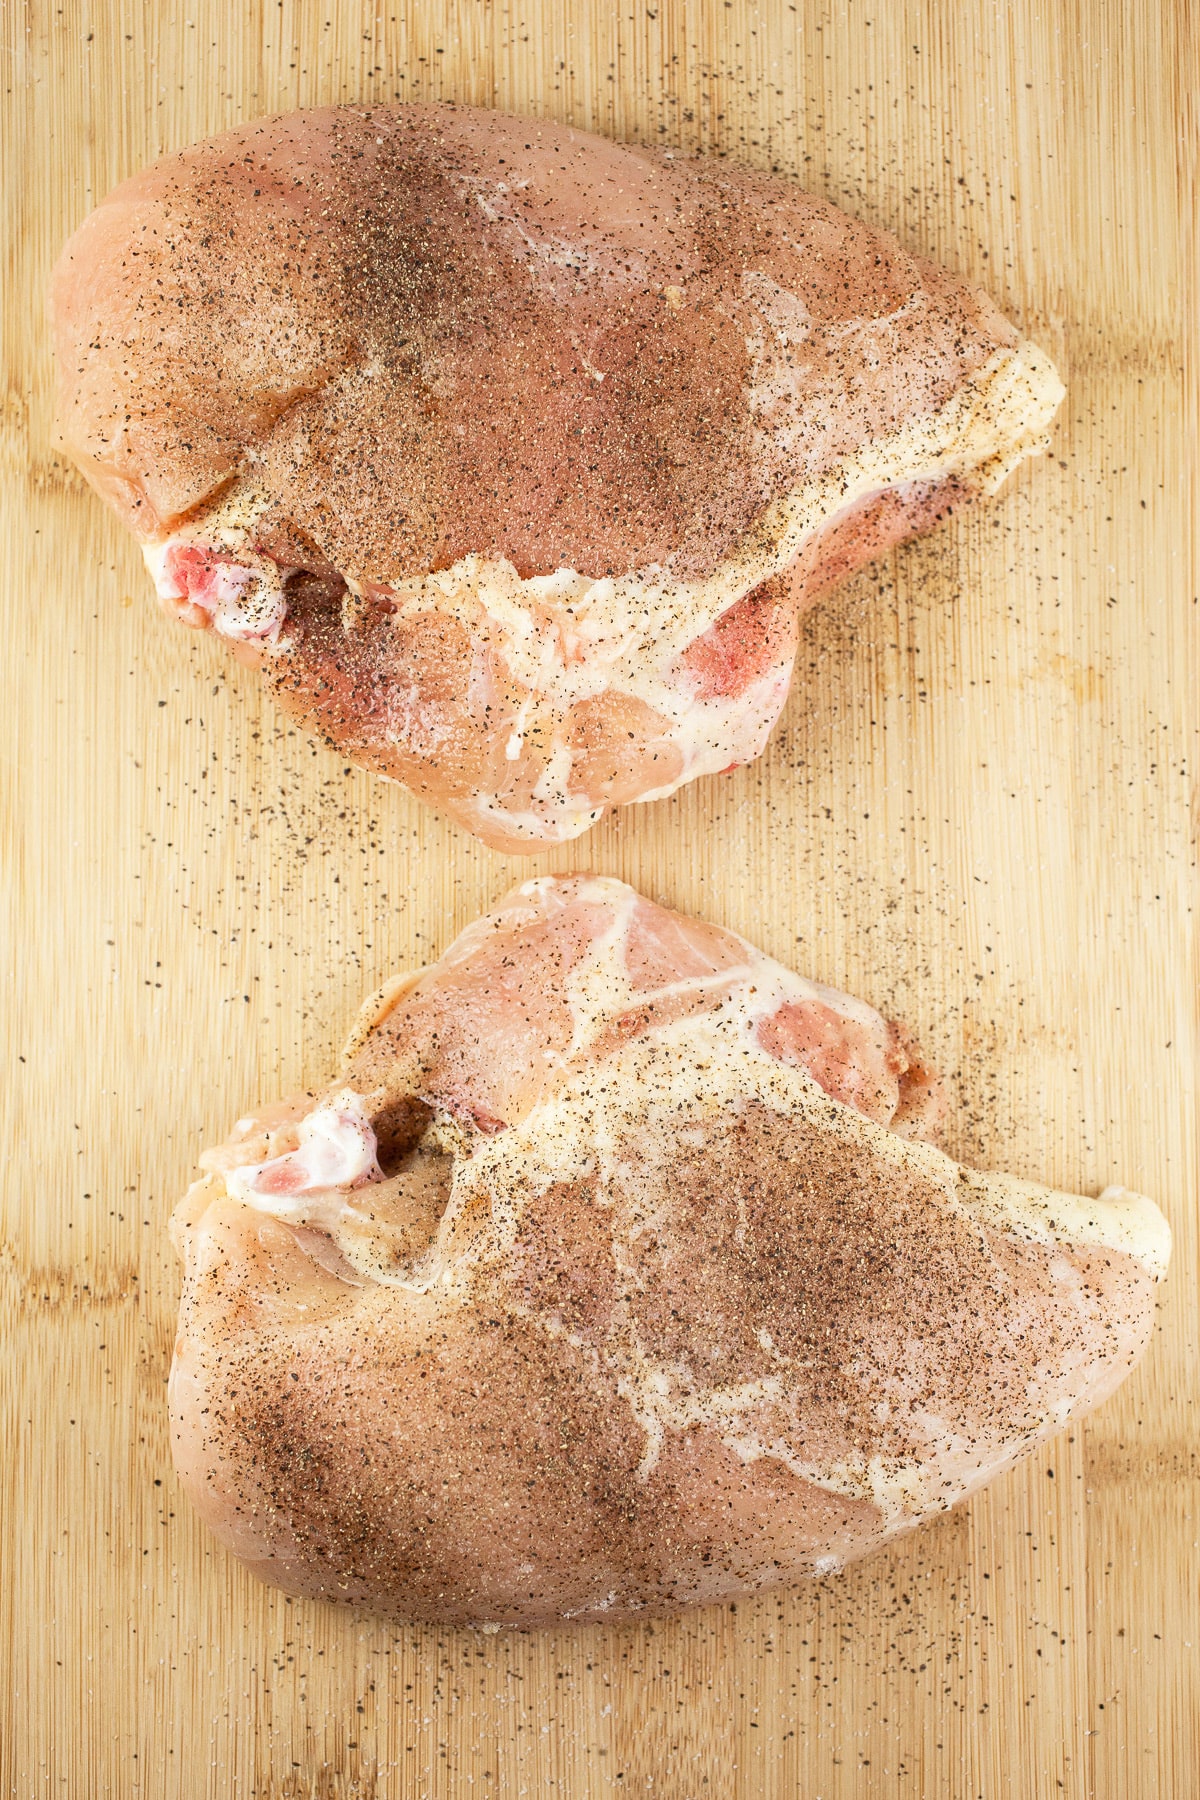 Raw split chicken breasts with salt and pepper on wooden cutting board.